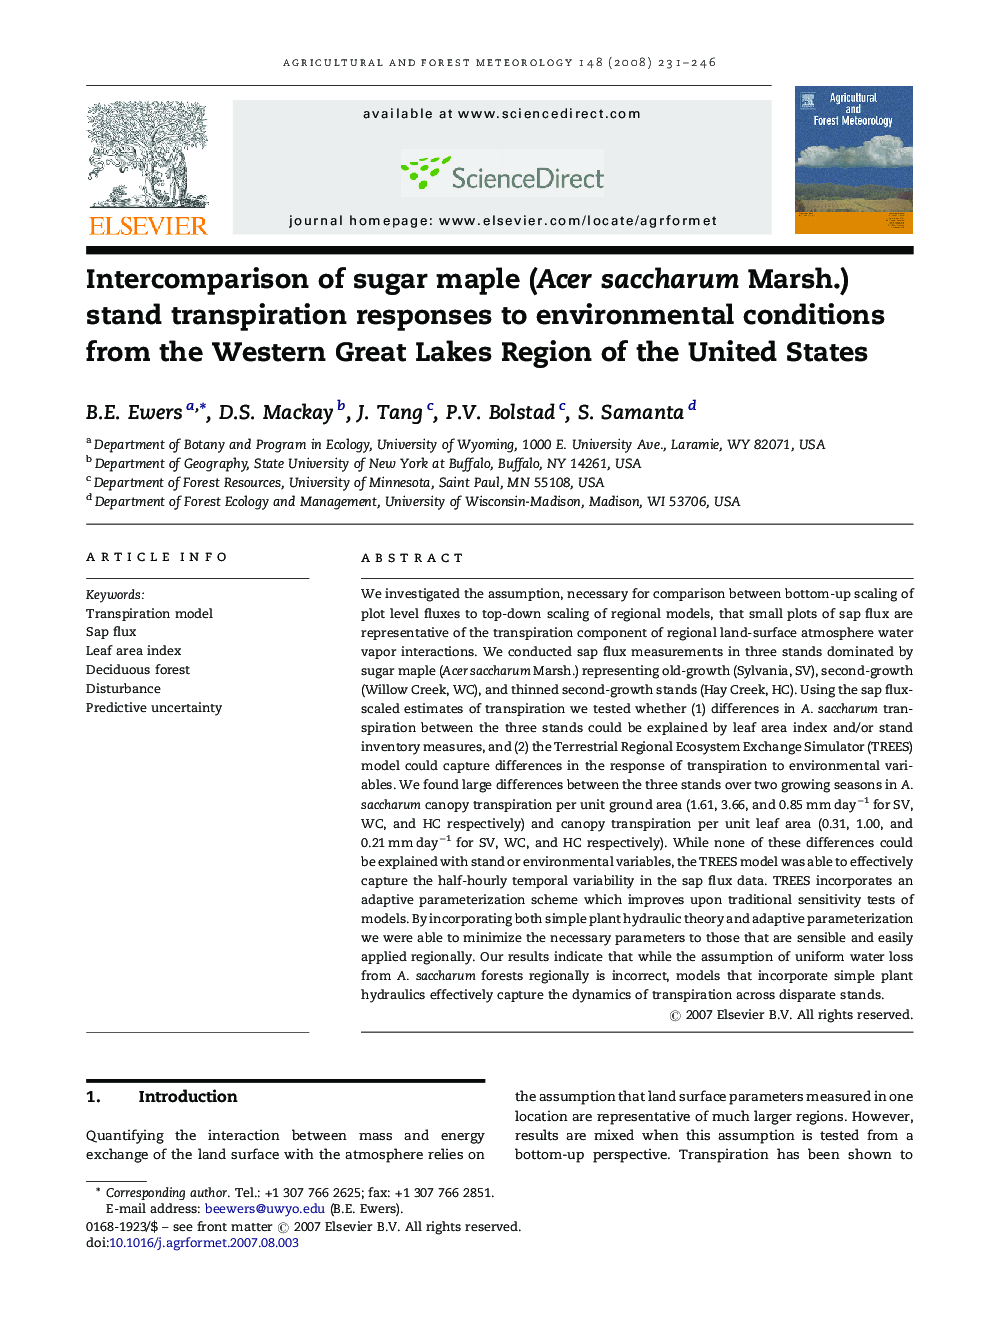 Intercomparison of sugar maple (Acer saccharum Marsh.) stand transpiration responses to environmental conditions from the Western Great Lakes Region of the United States